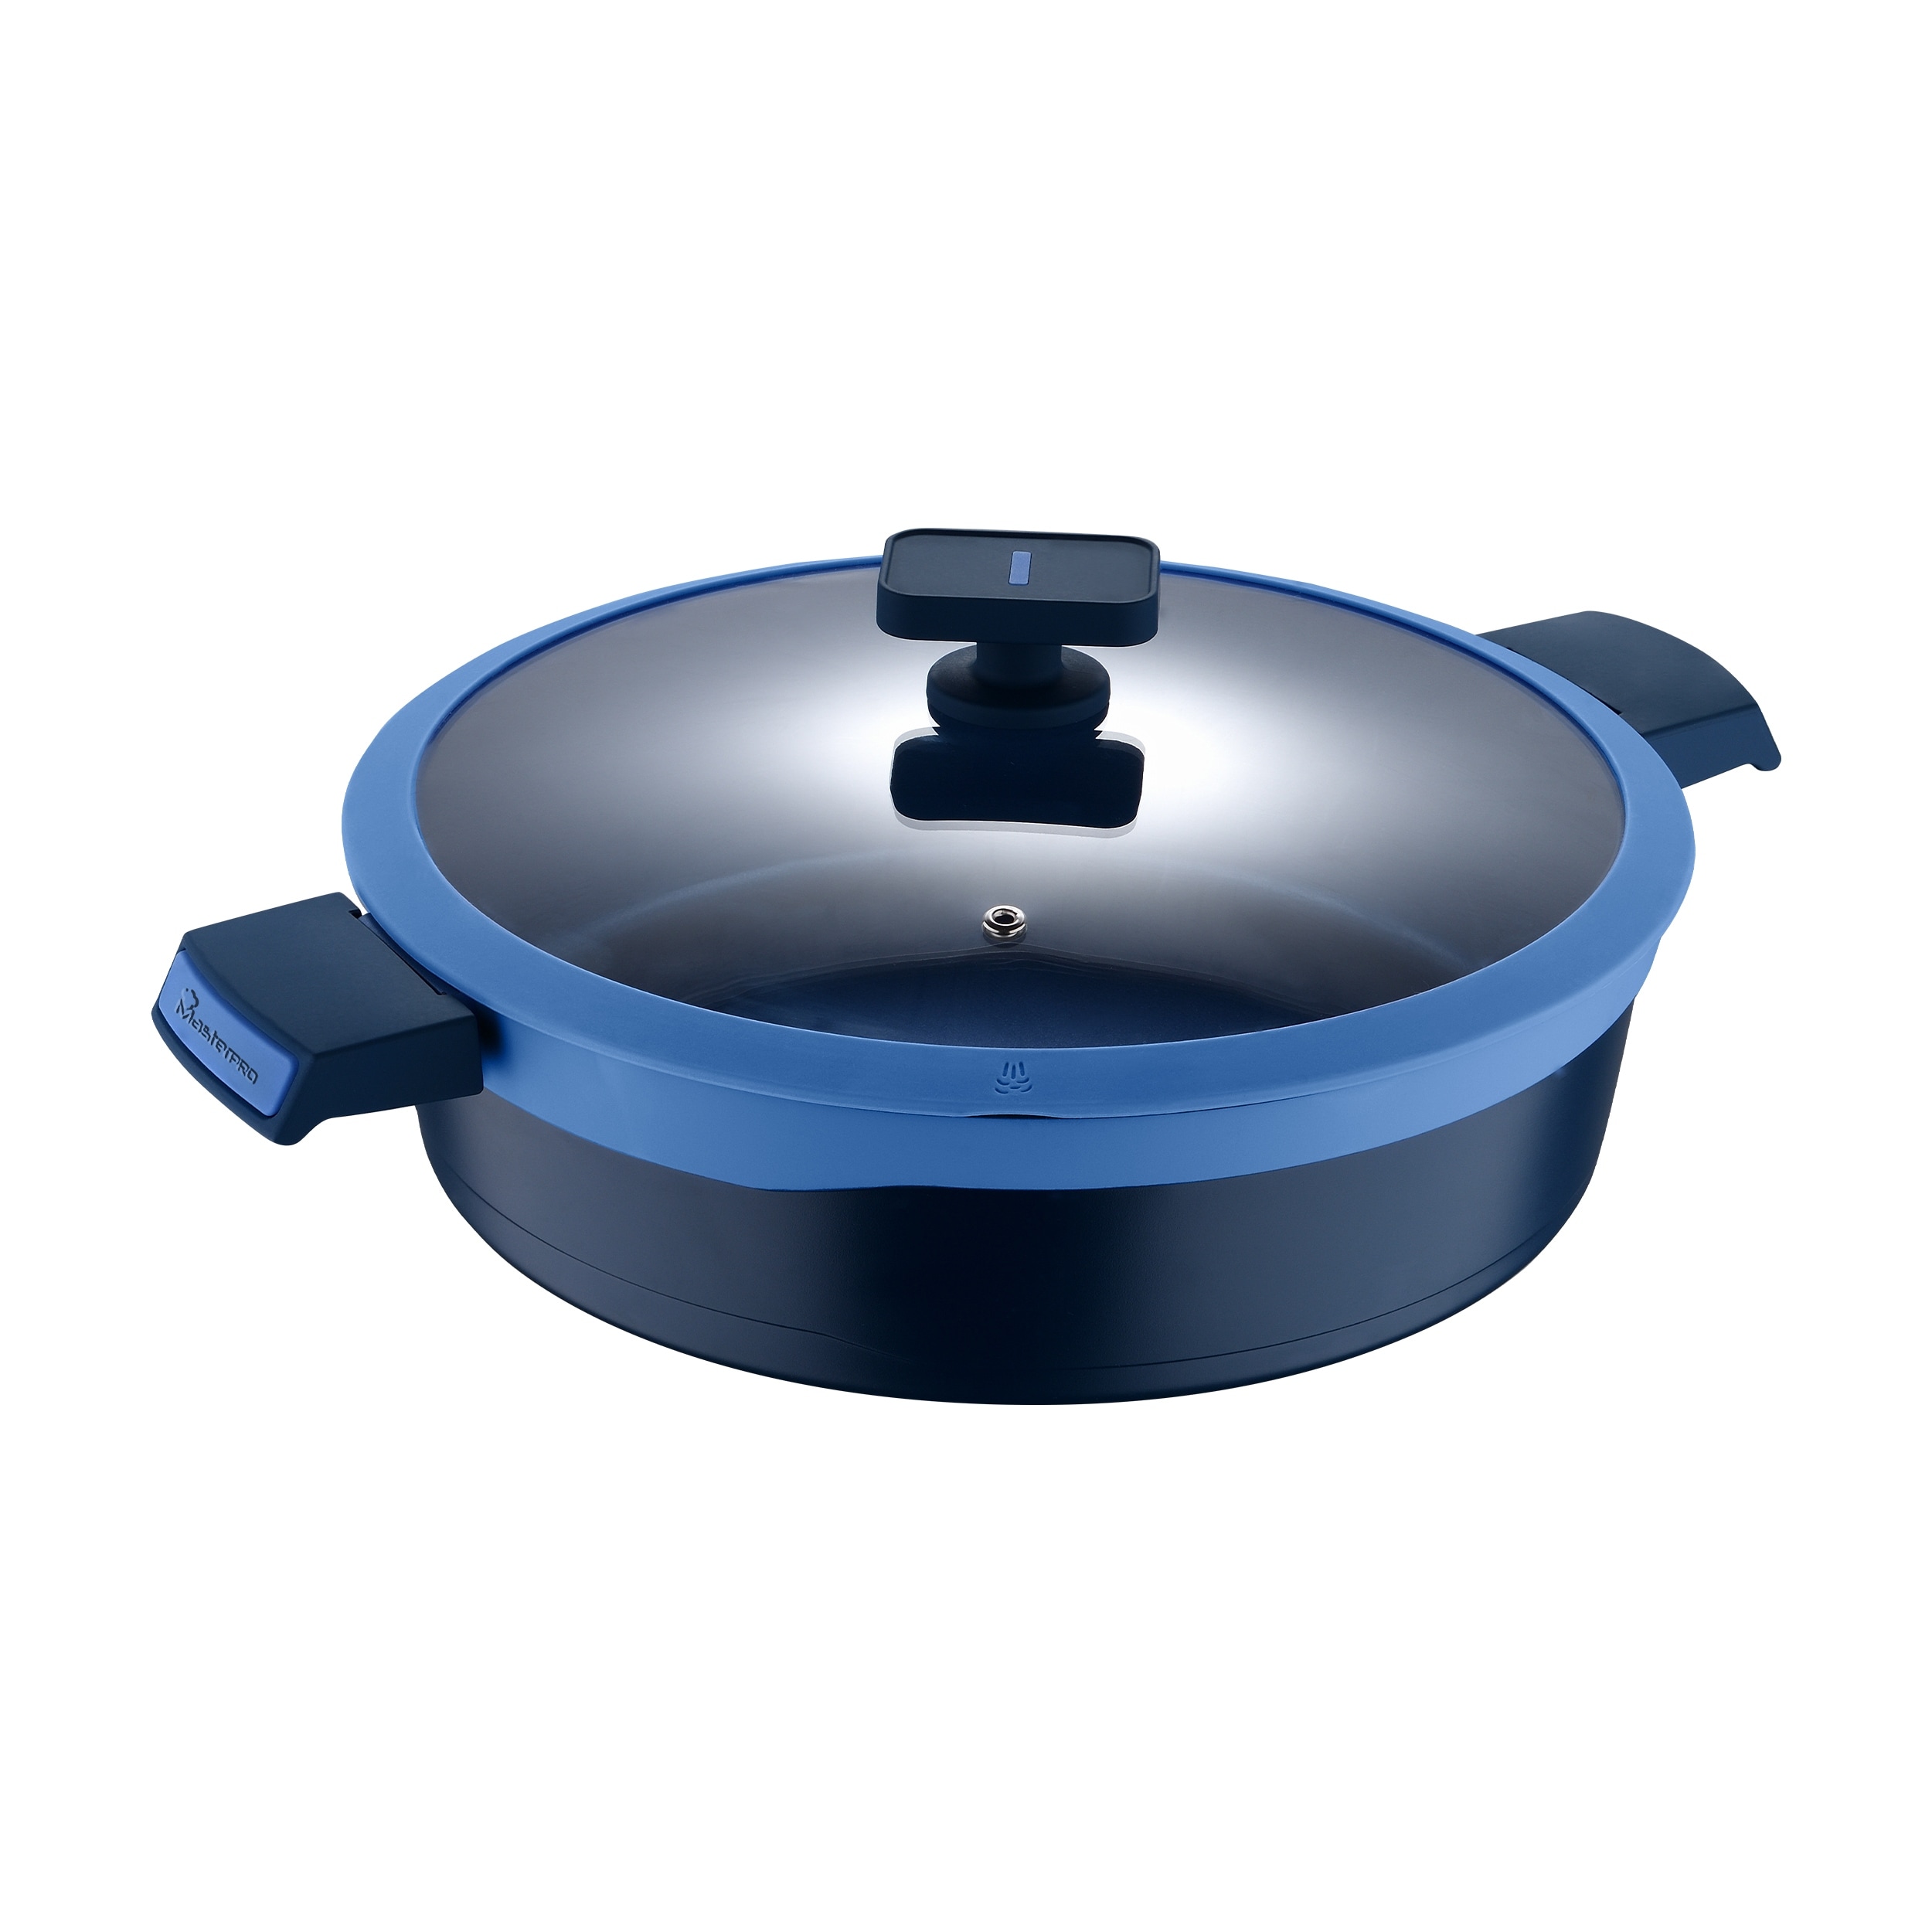 MasterPRO Gastro Diamond Collection 5.2 qt. Cast Aluminum Everyday Pan with Tempered Glass Lid, Blue